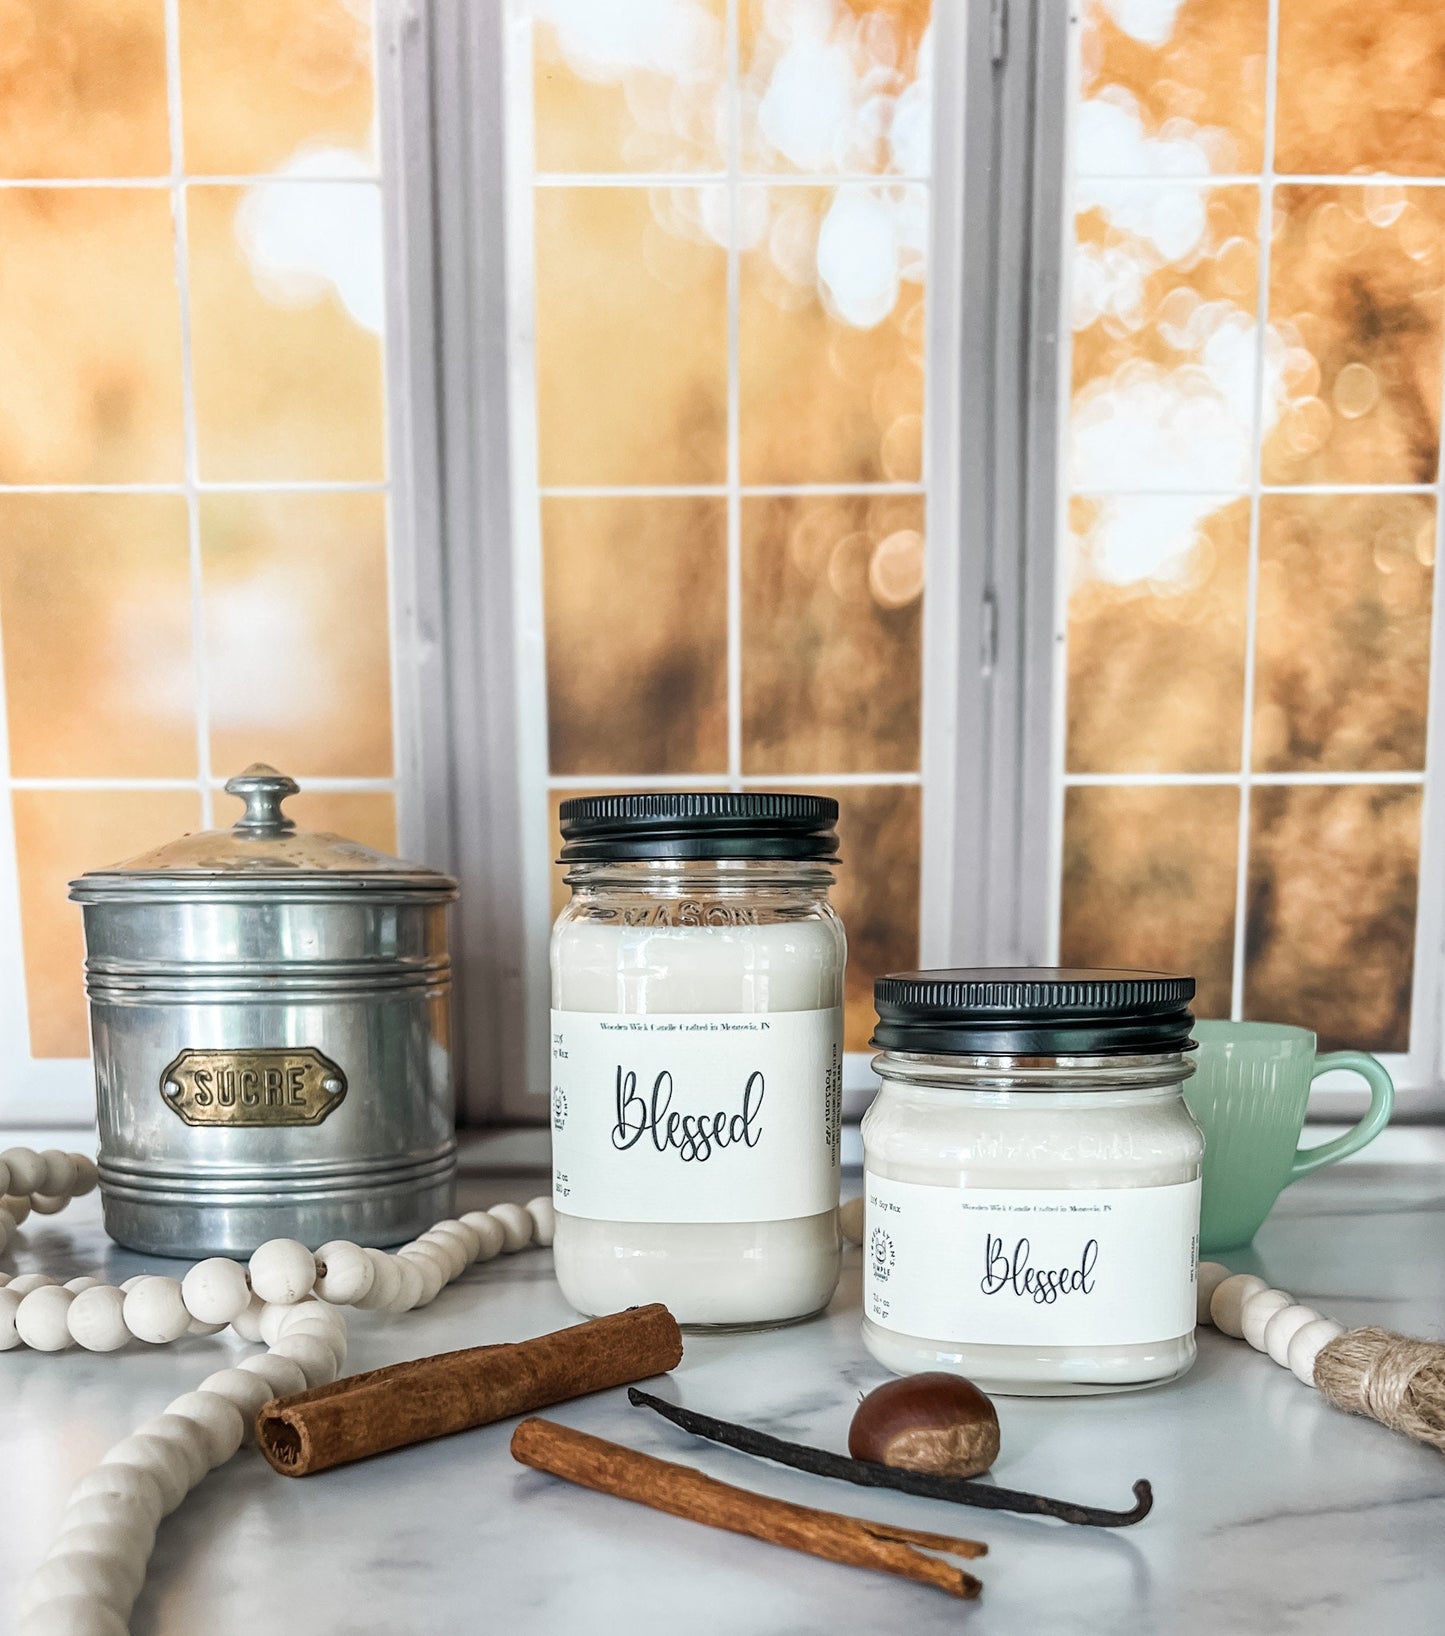 Blessed - Wooden wick soy wax mason jar candle